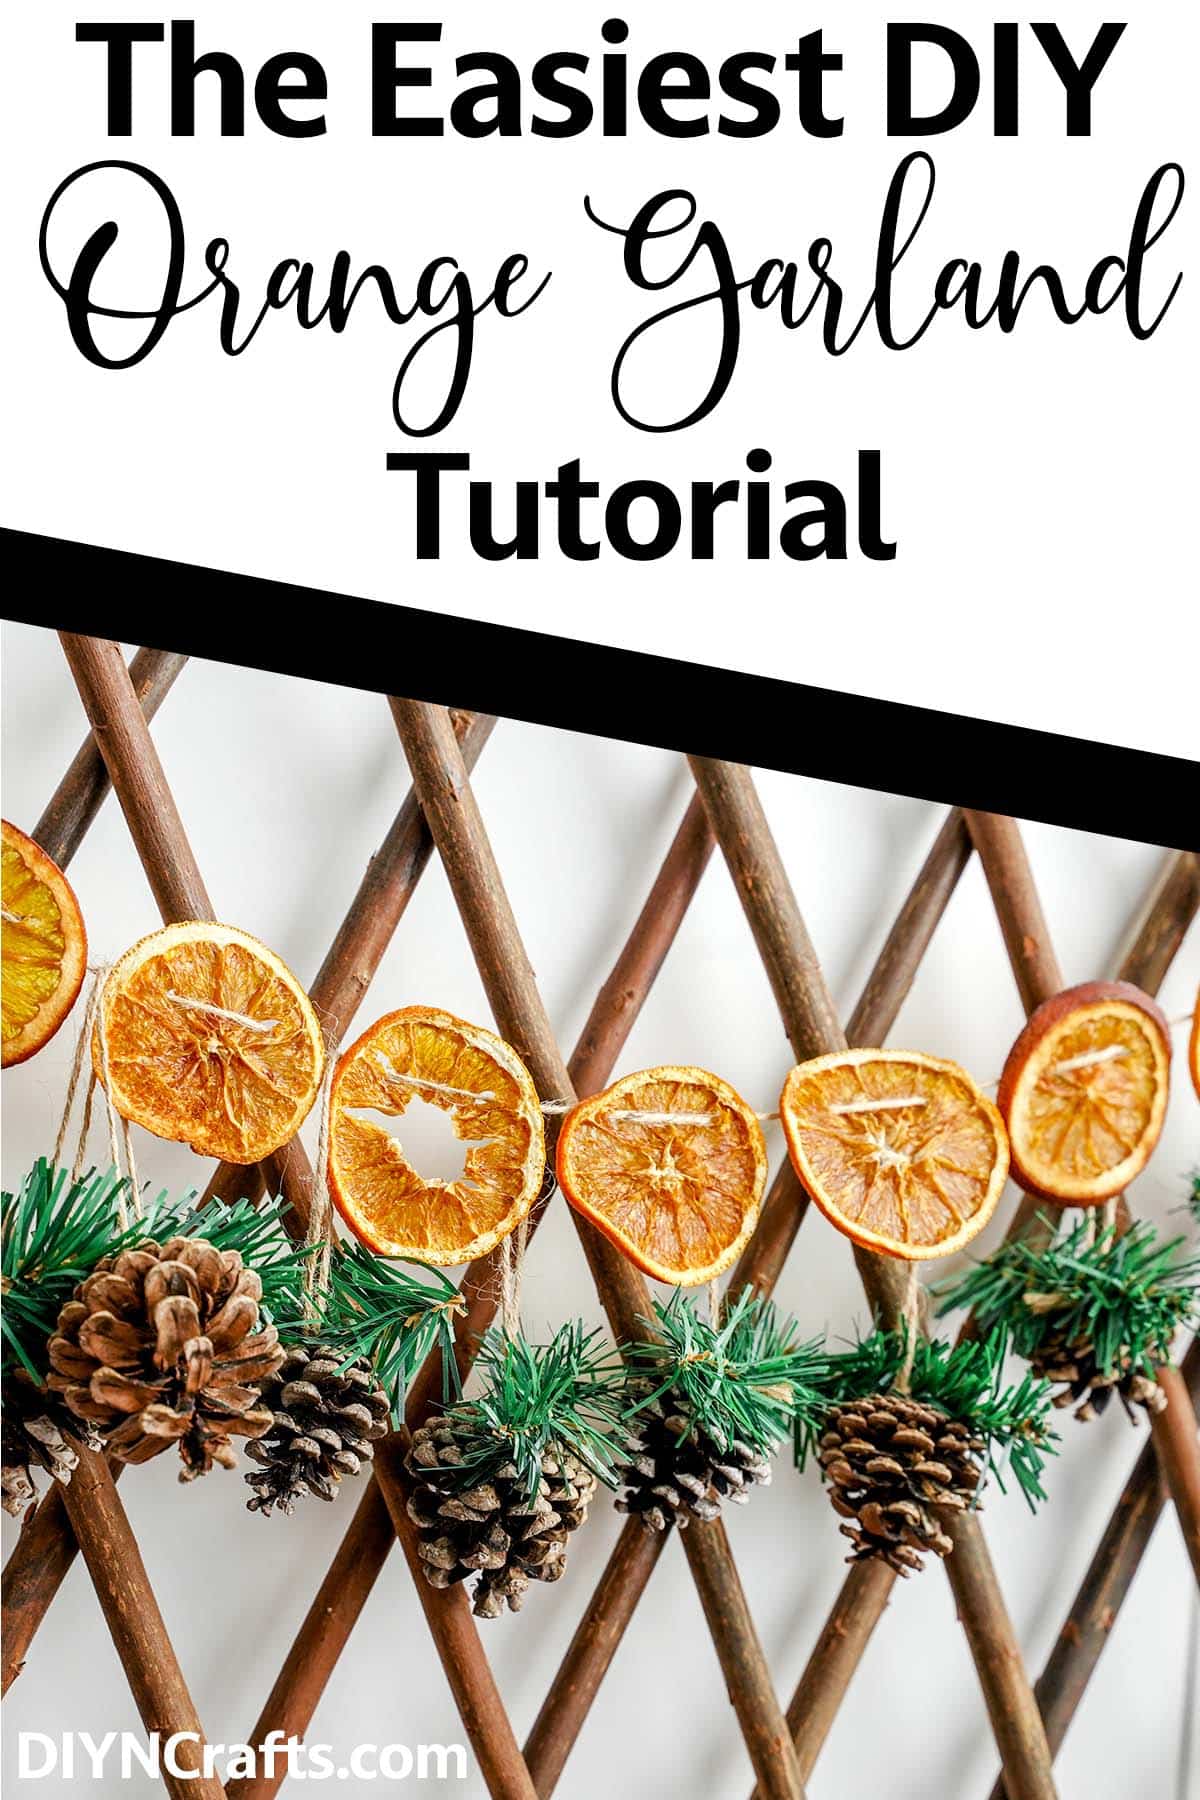 homemade citrus garland with text which reads the easiest diy dried orange garland tutorial